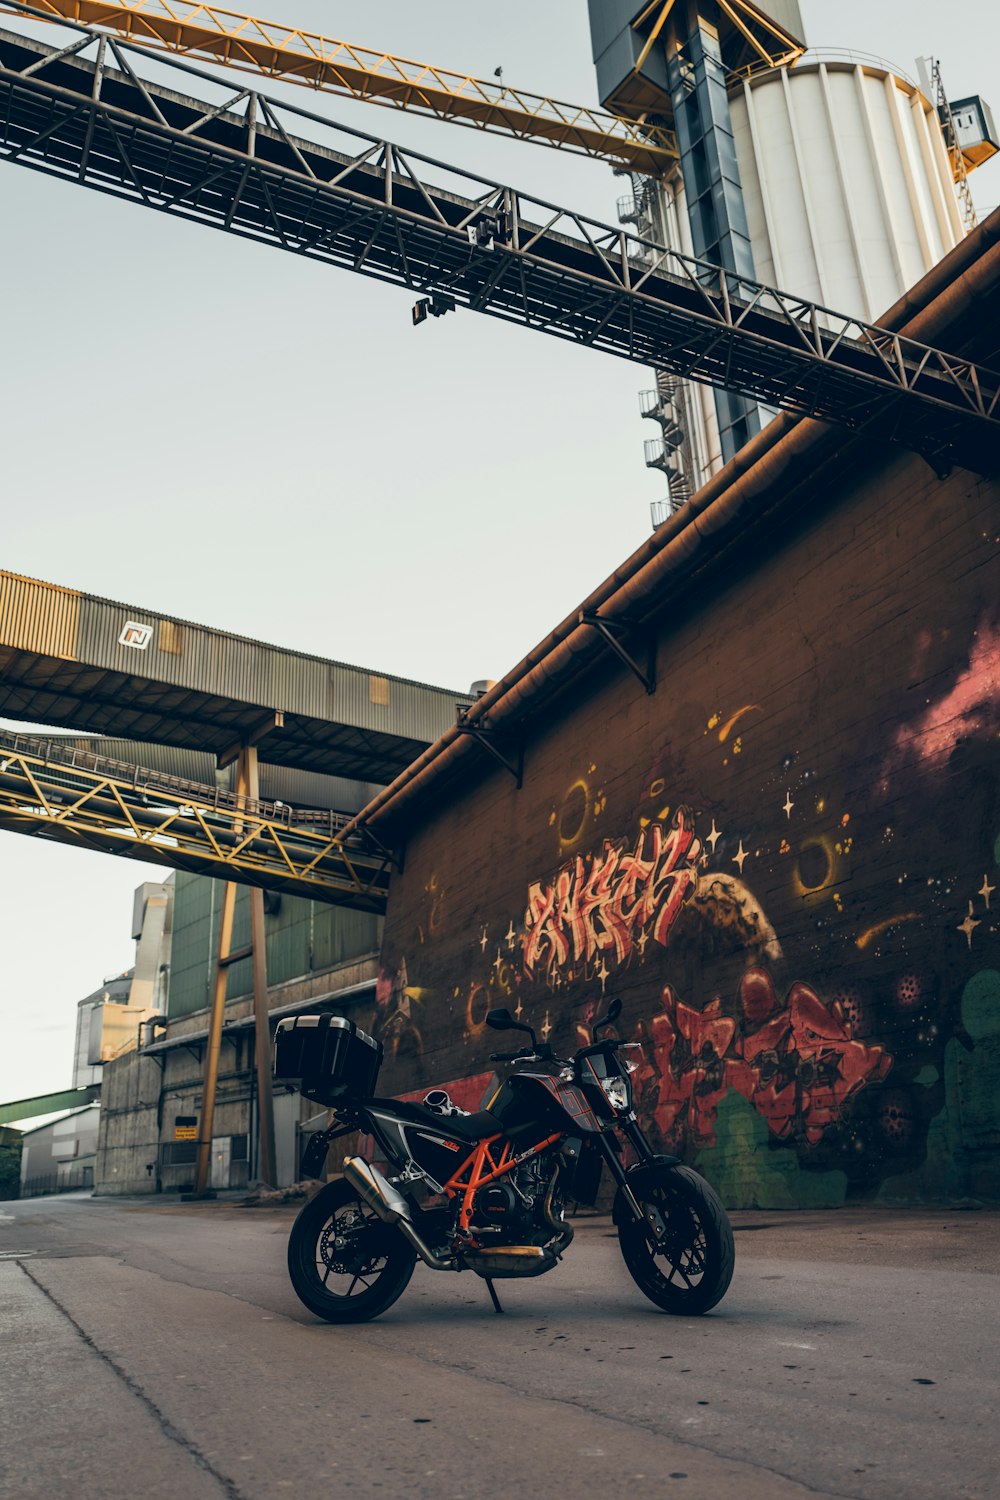 motorcycle parked near wall with murals